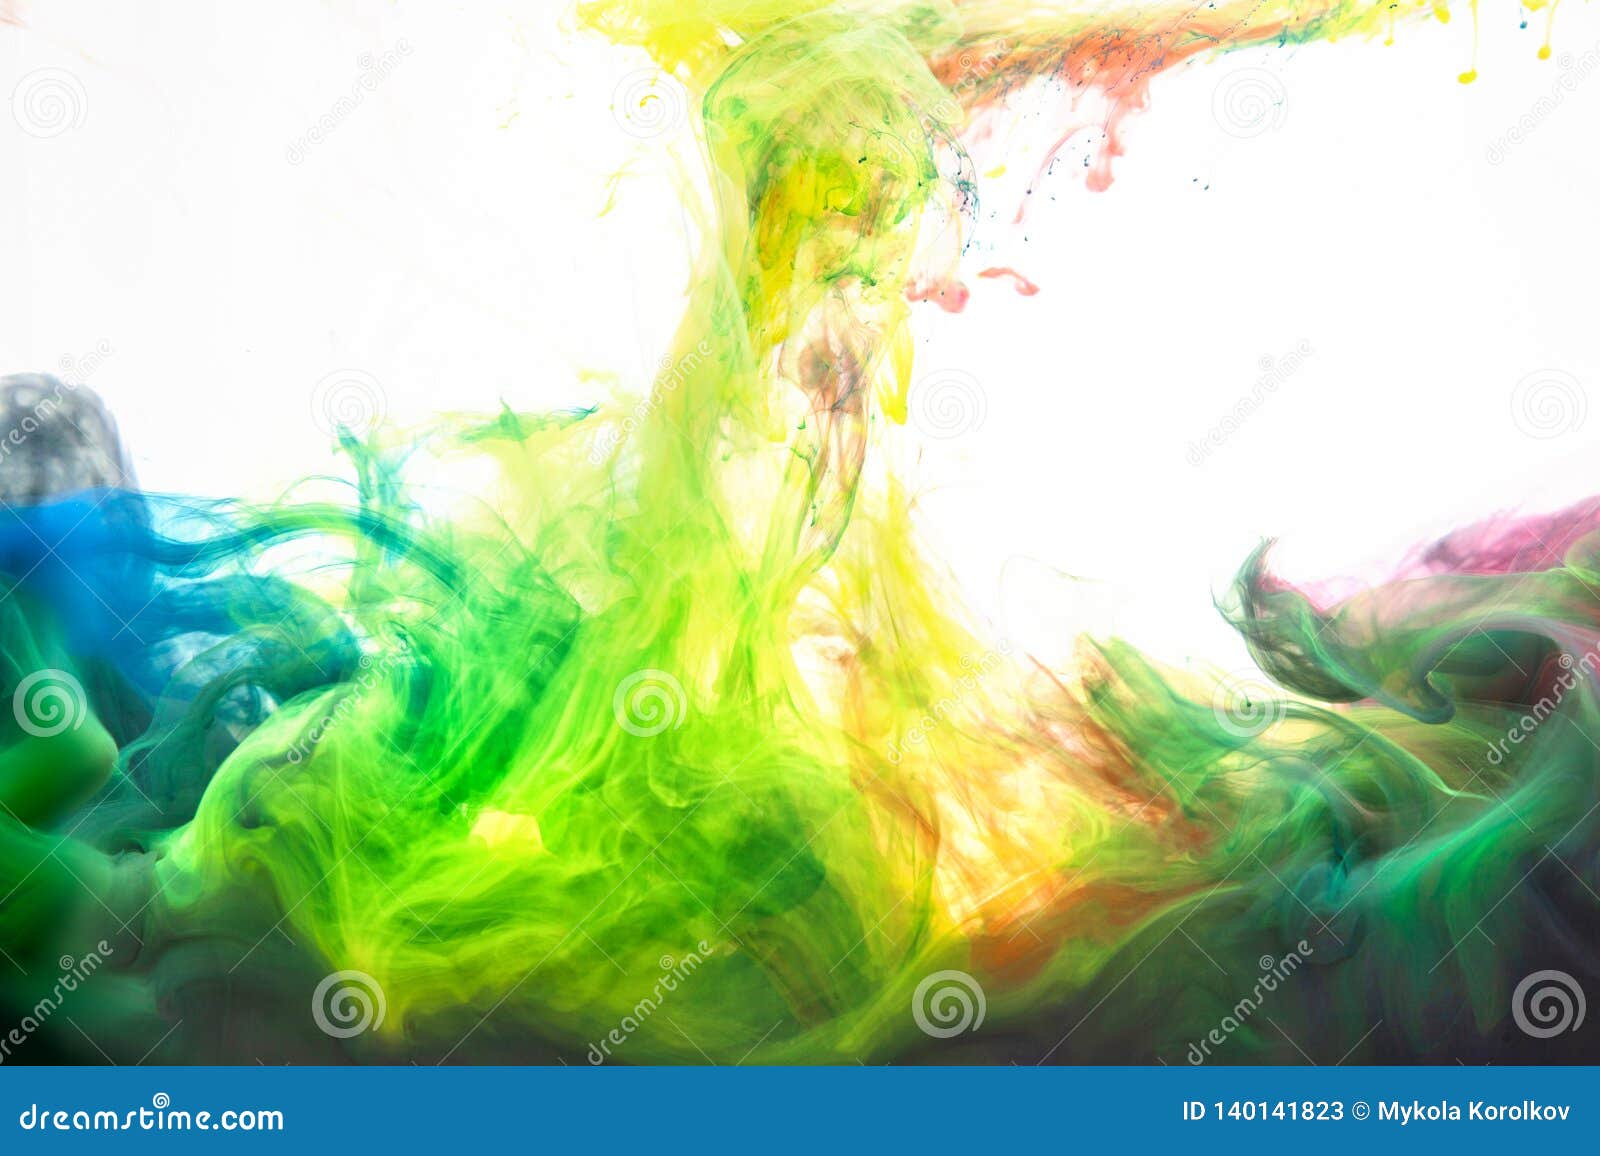 Ink in Water. Abstract Background. . Ink Swirling in Water. Ink in ...